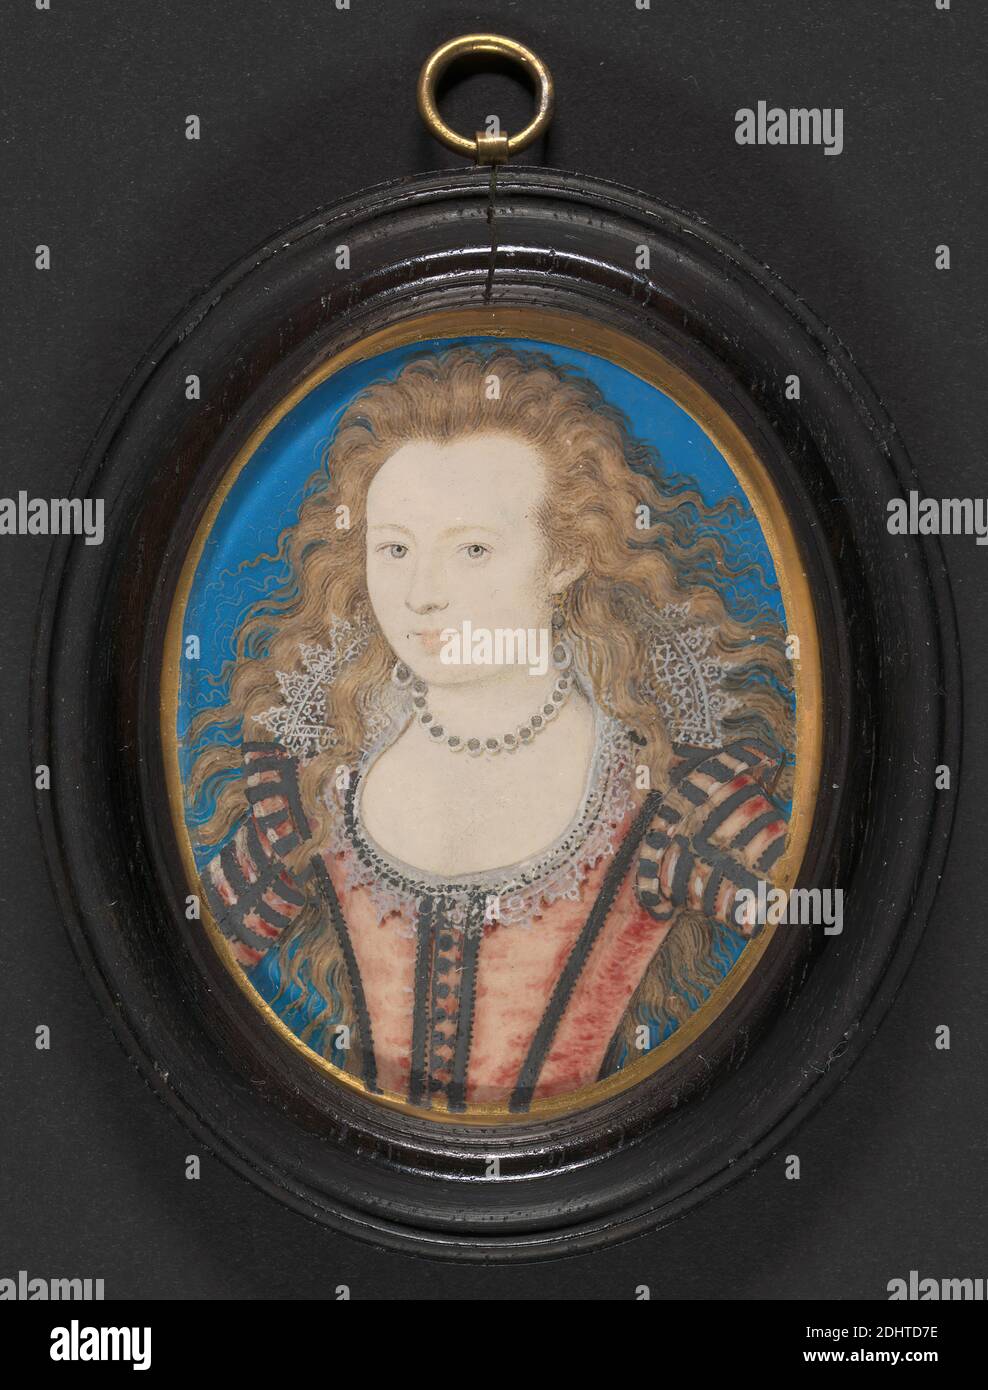 Portrait of a Lady, Nicholas Hilliard, ca. 1547–1619, British, between 1600 and 1615, Watercolor and gouache on vellum laid onto card, Sheet: 2 x 1 11/16 inches (5.1 x 4.3 cm) and Frame: 2 3/4 x 2 1/4 x 1/2 inches (7 x 5.7 x 1.3 cm), portrait Stock Photo